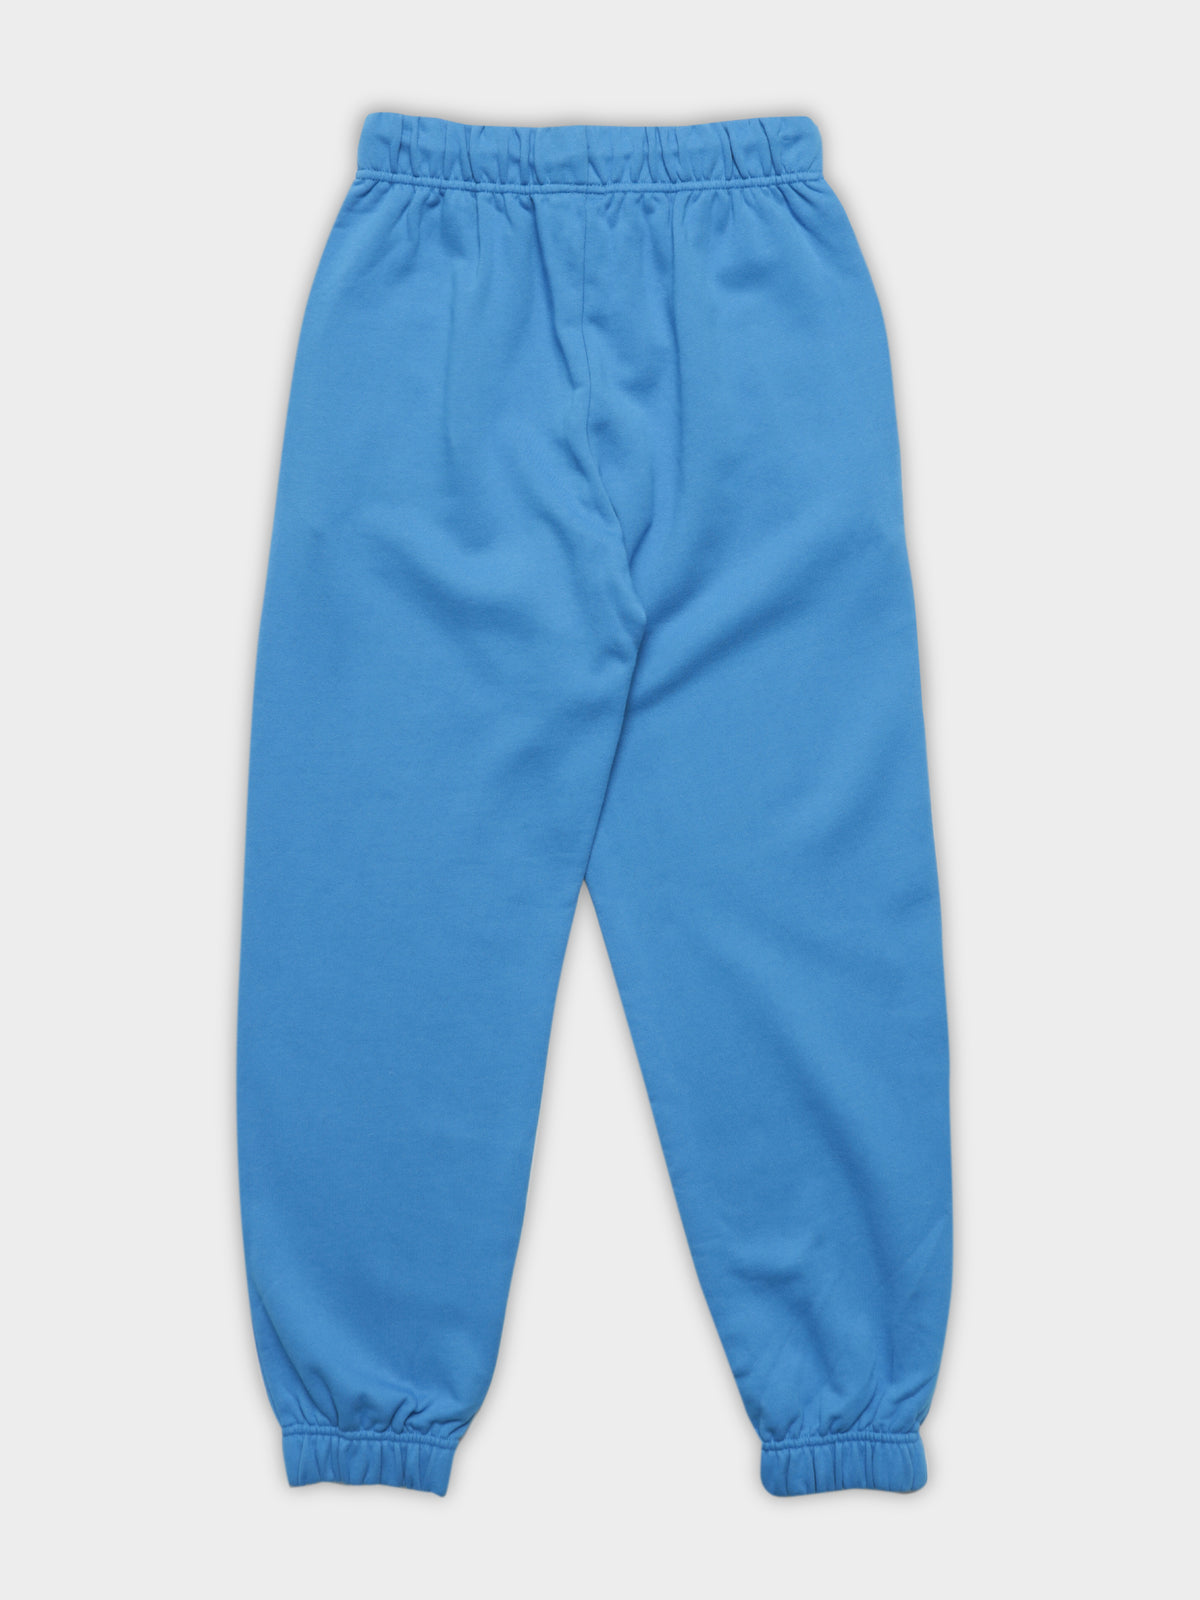 Heads Up Trackpants in Bright Blue